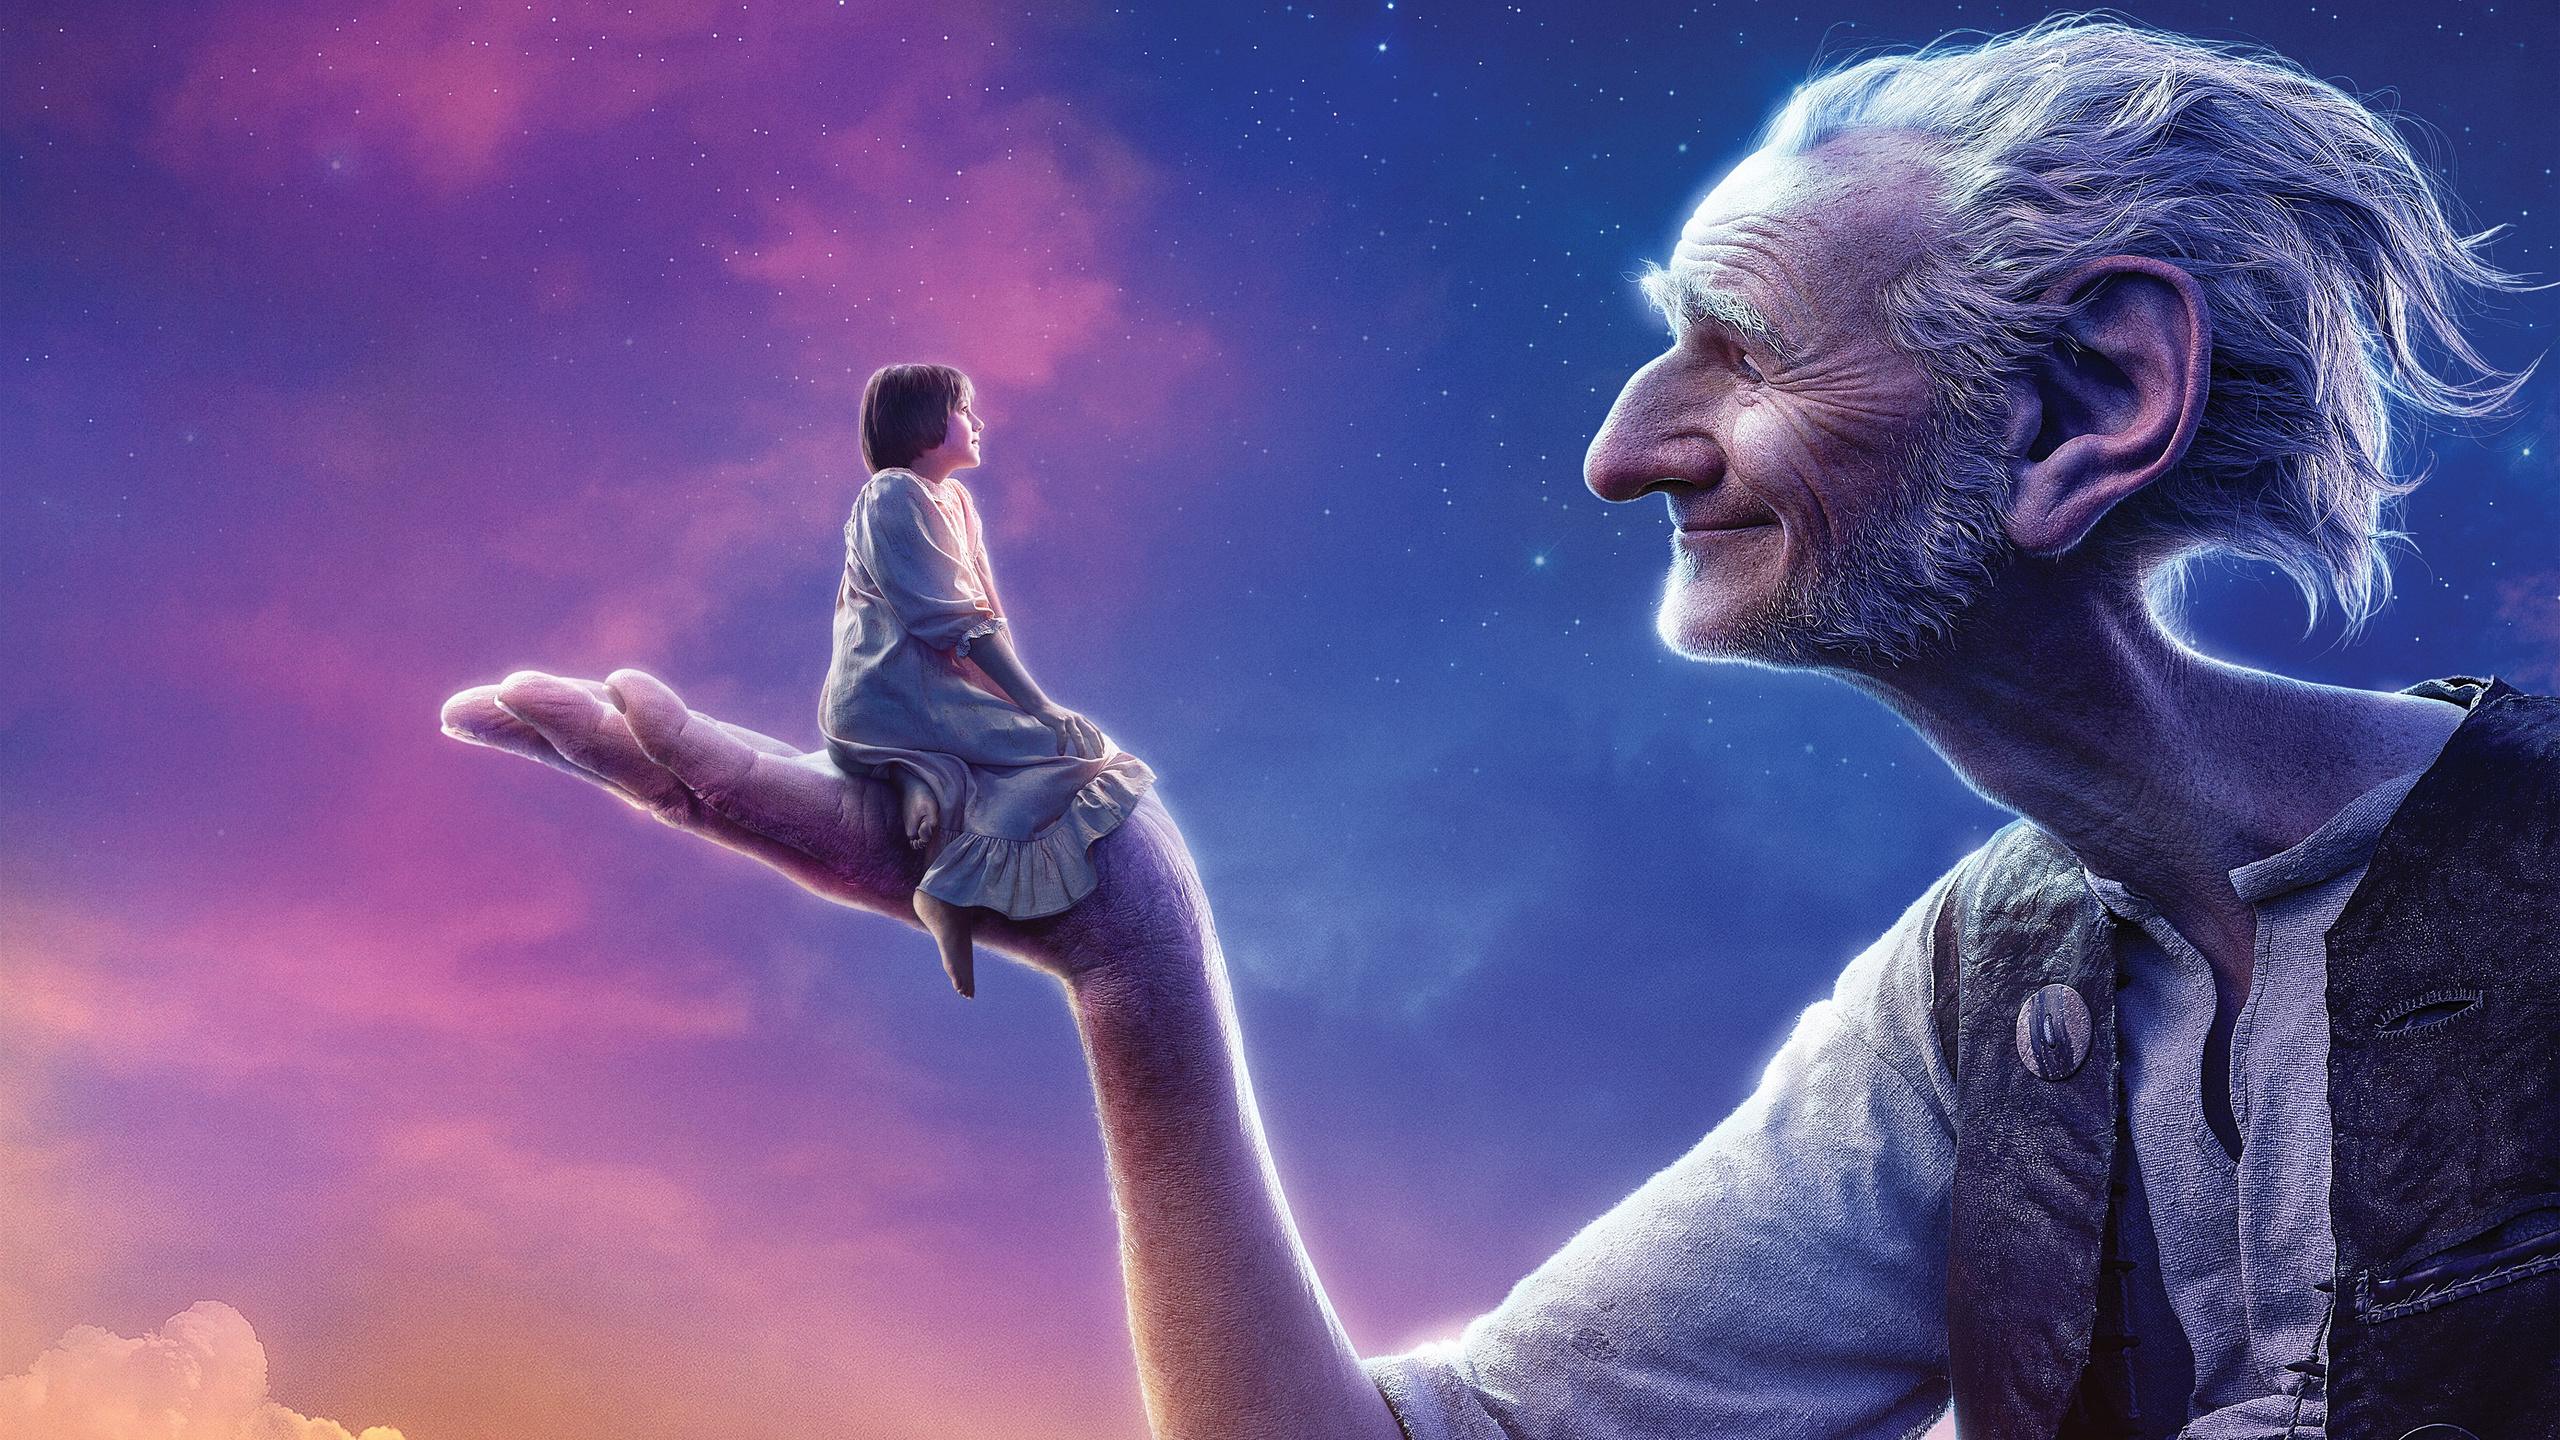 the, beautiful, white, 2016, amblin entertainment, old man, hair, young, giant, sunshine, walt disney pictures, sophie, dreamworks, skg, bfg, mark rylance, the big friendly giant, ruby barnhill, the bfg, stars, entertainment one, girl, clouds, sky, wonder